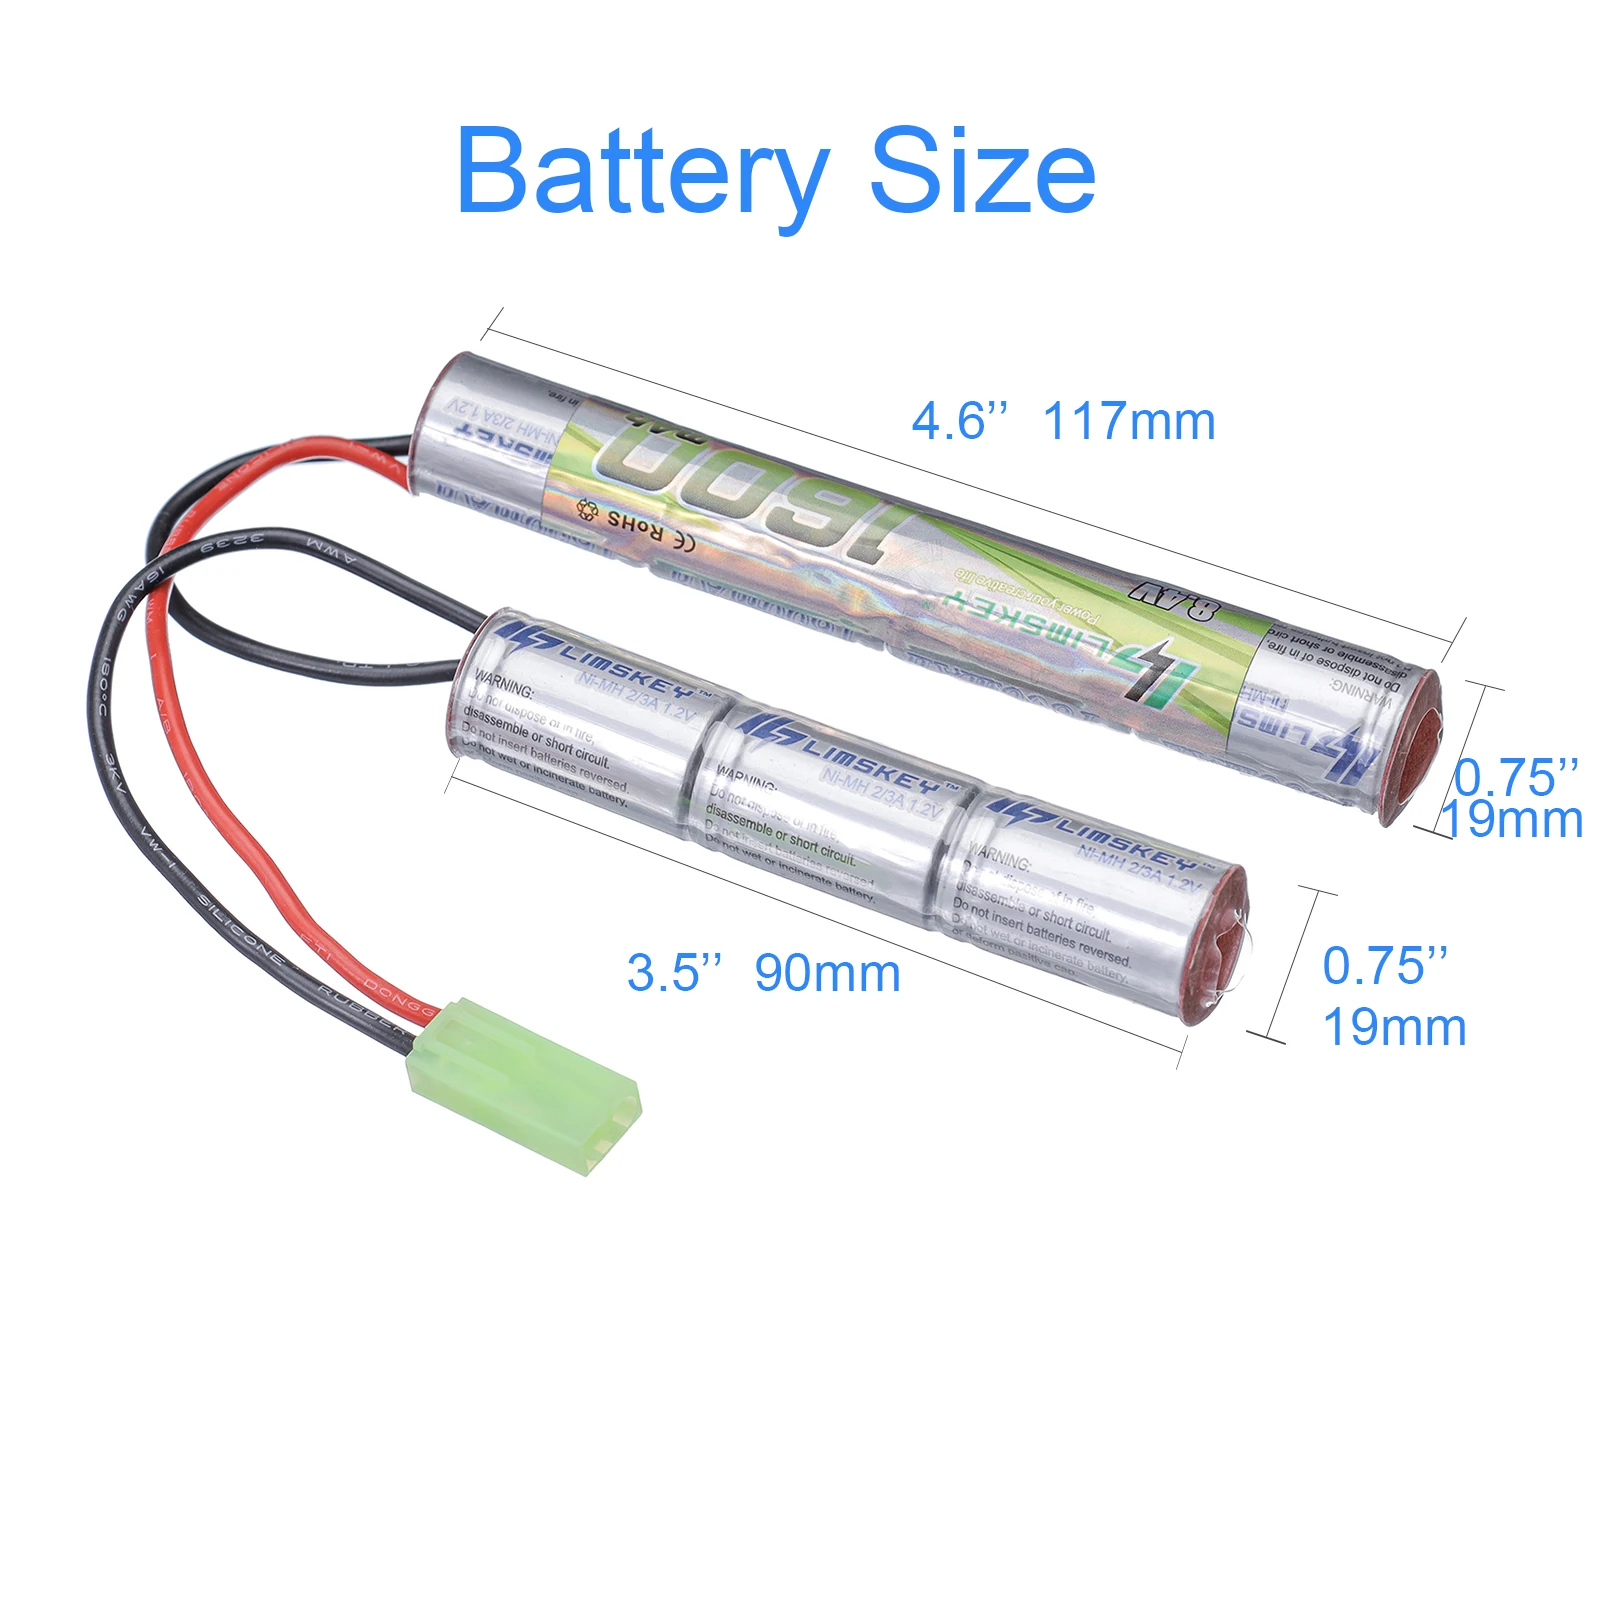 

2pcs Limskey 2/3A 8.4v 1600mAh Butterfly Nunchuck NIMH Battery Pack with Mini Tamiya Connector for Airsoft Guns M110, SR25, M249